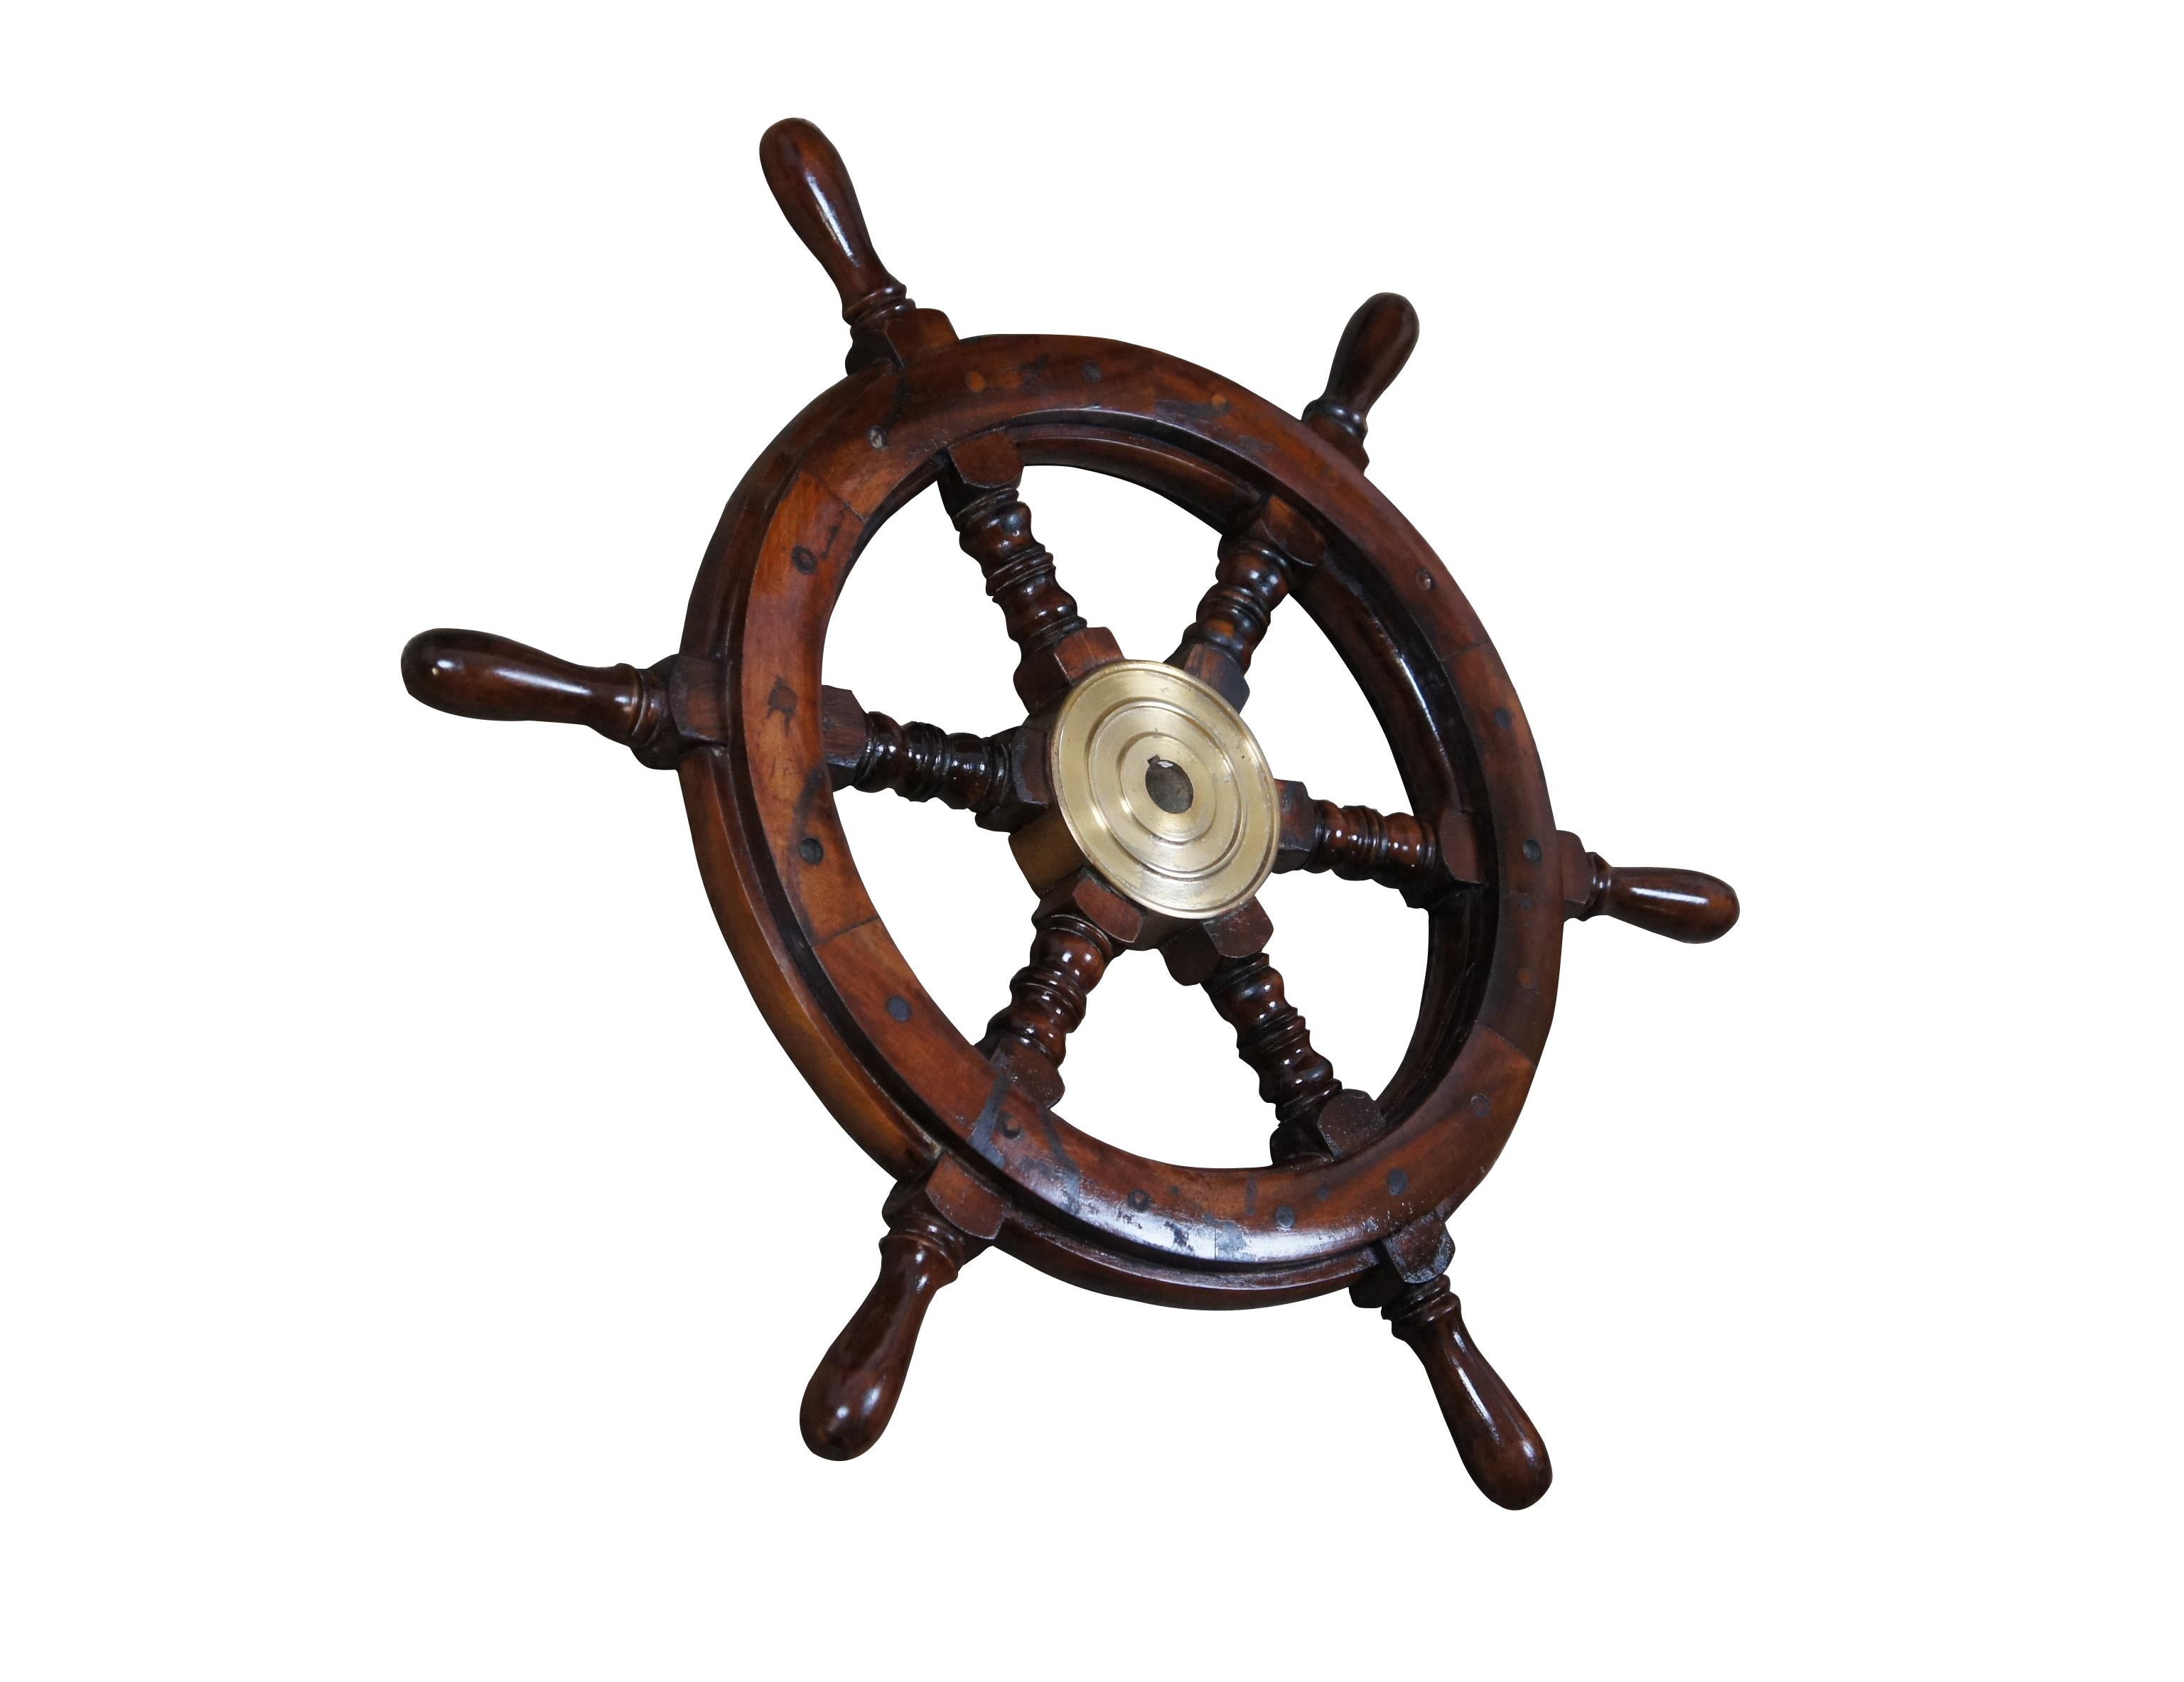 Late 20th century wood and brass ship's steering wheel / helm. Traditionally styled with six turned spokes and brass center mount.

Dimensions:
24